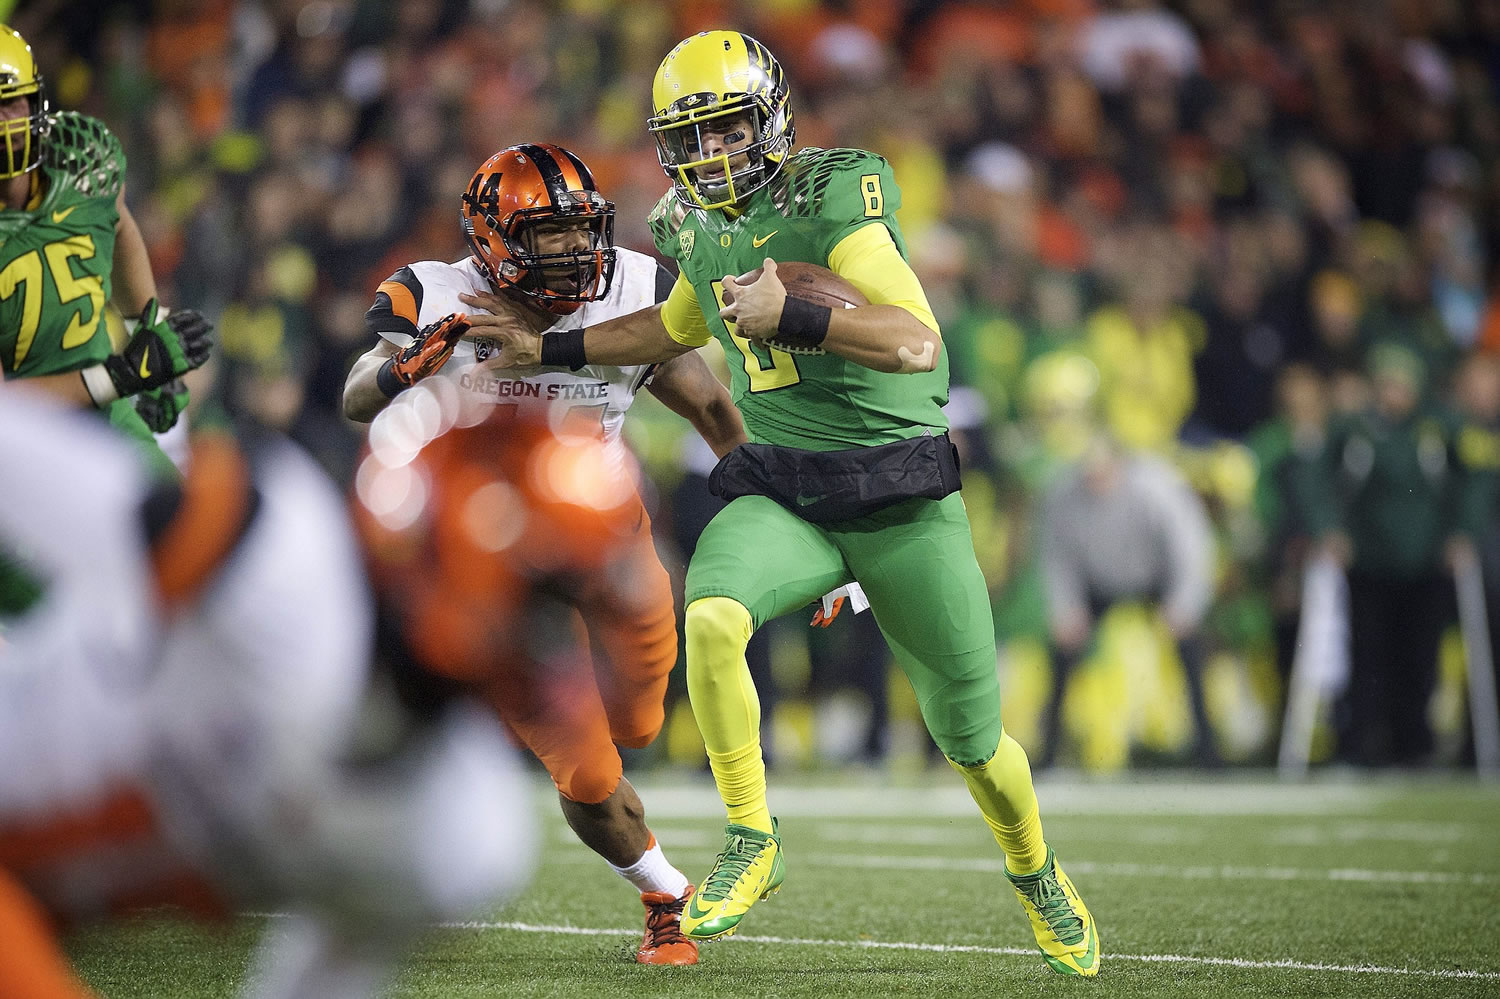 Oregon quarterback Marcus Mariota (8) breaks away from Oregon State defender Jabral Johnson (44) for a touchdown during the second quarter Saturday in Corvallis, Ore.